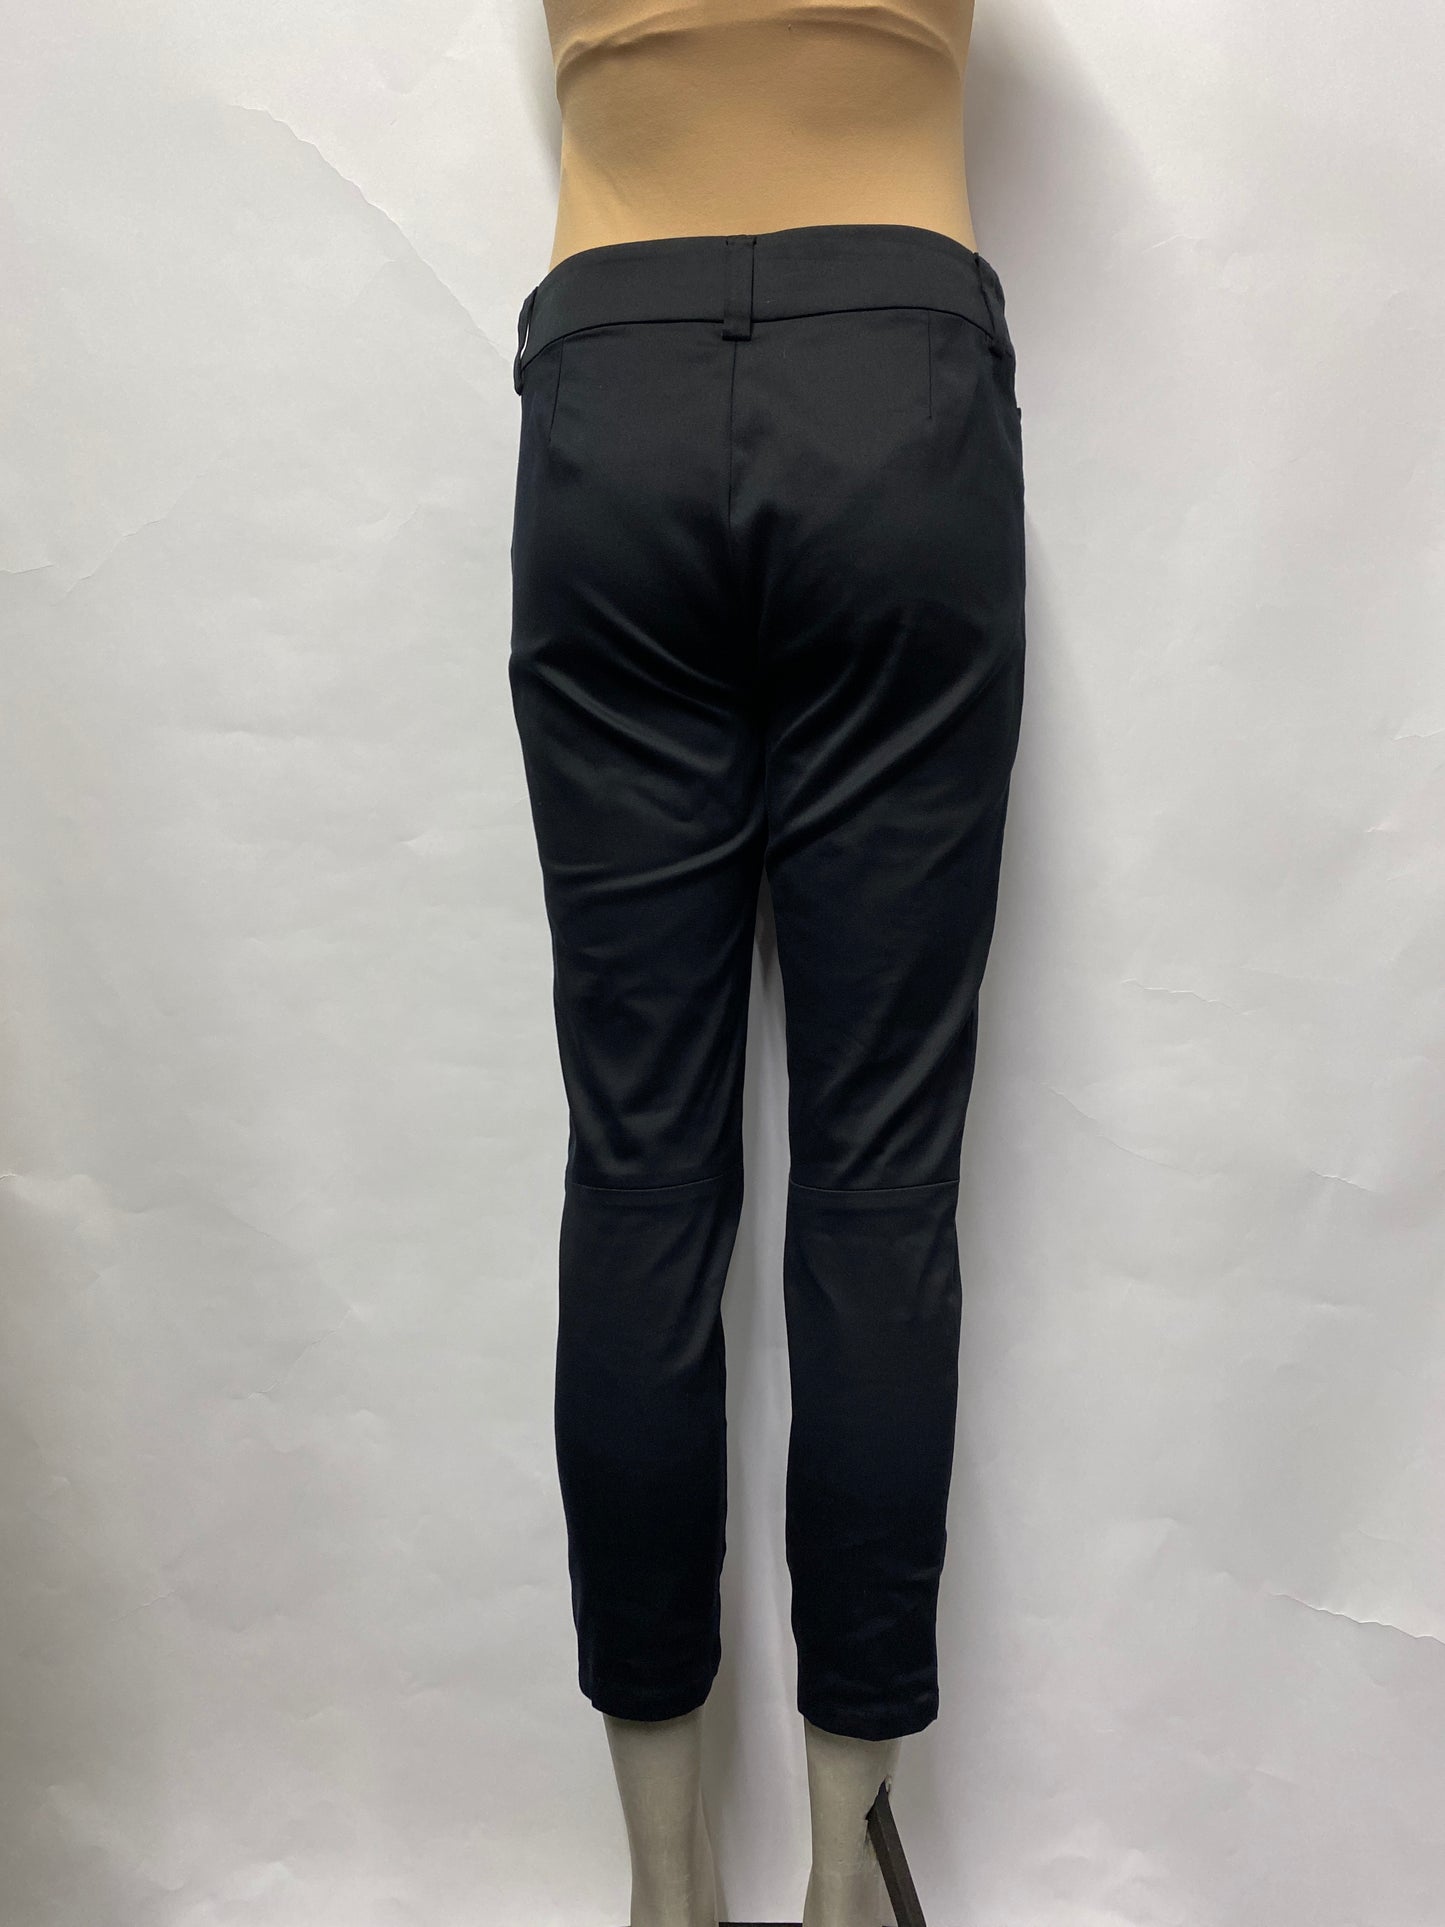 Agnès b. Black Smart Tapered Cropped Trousers 10